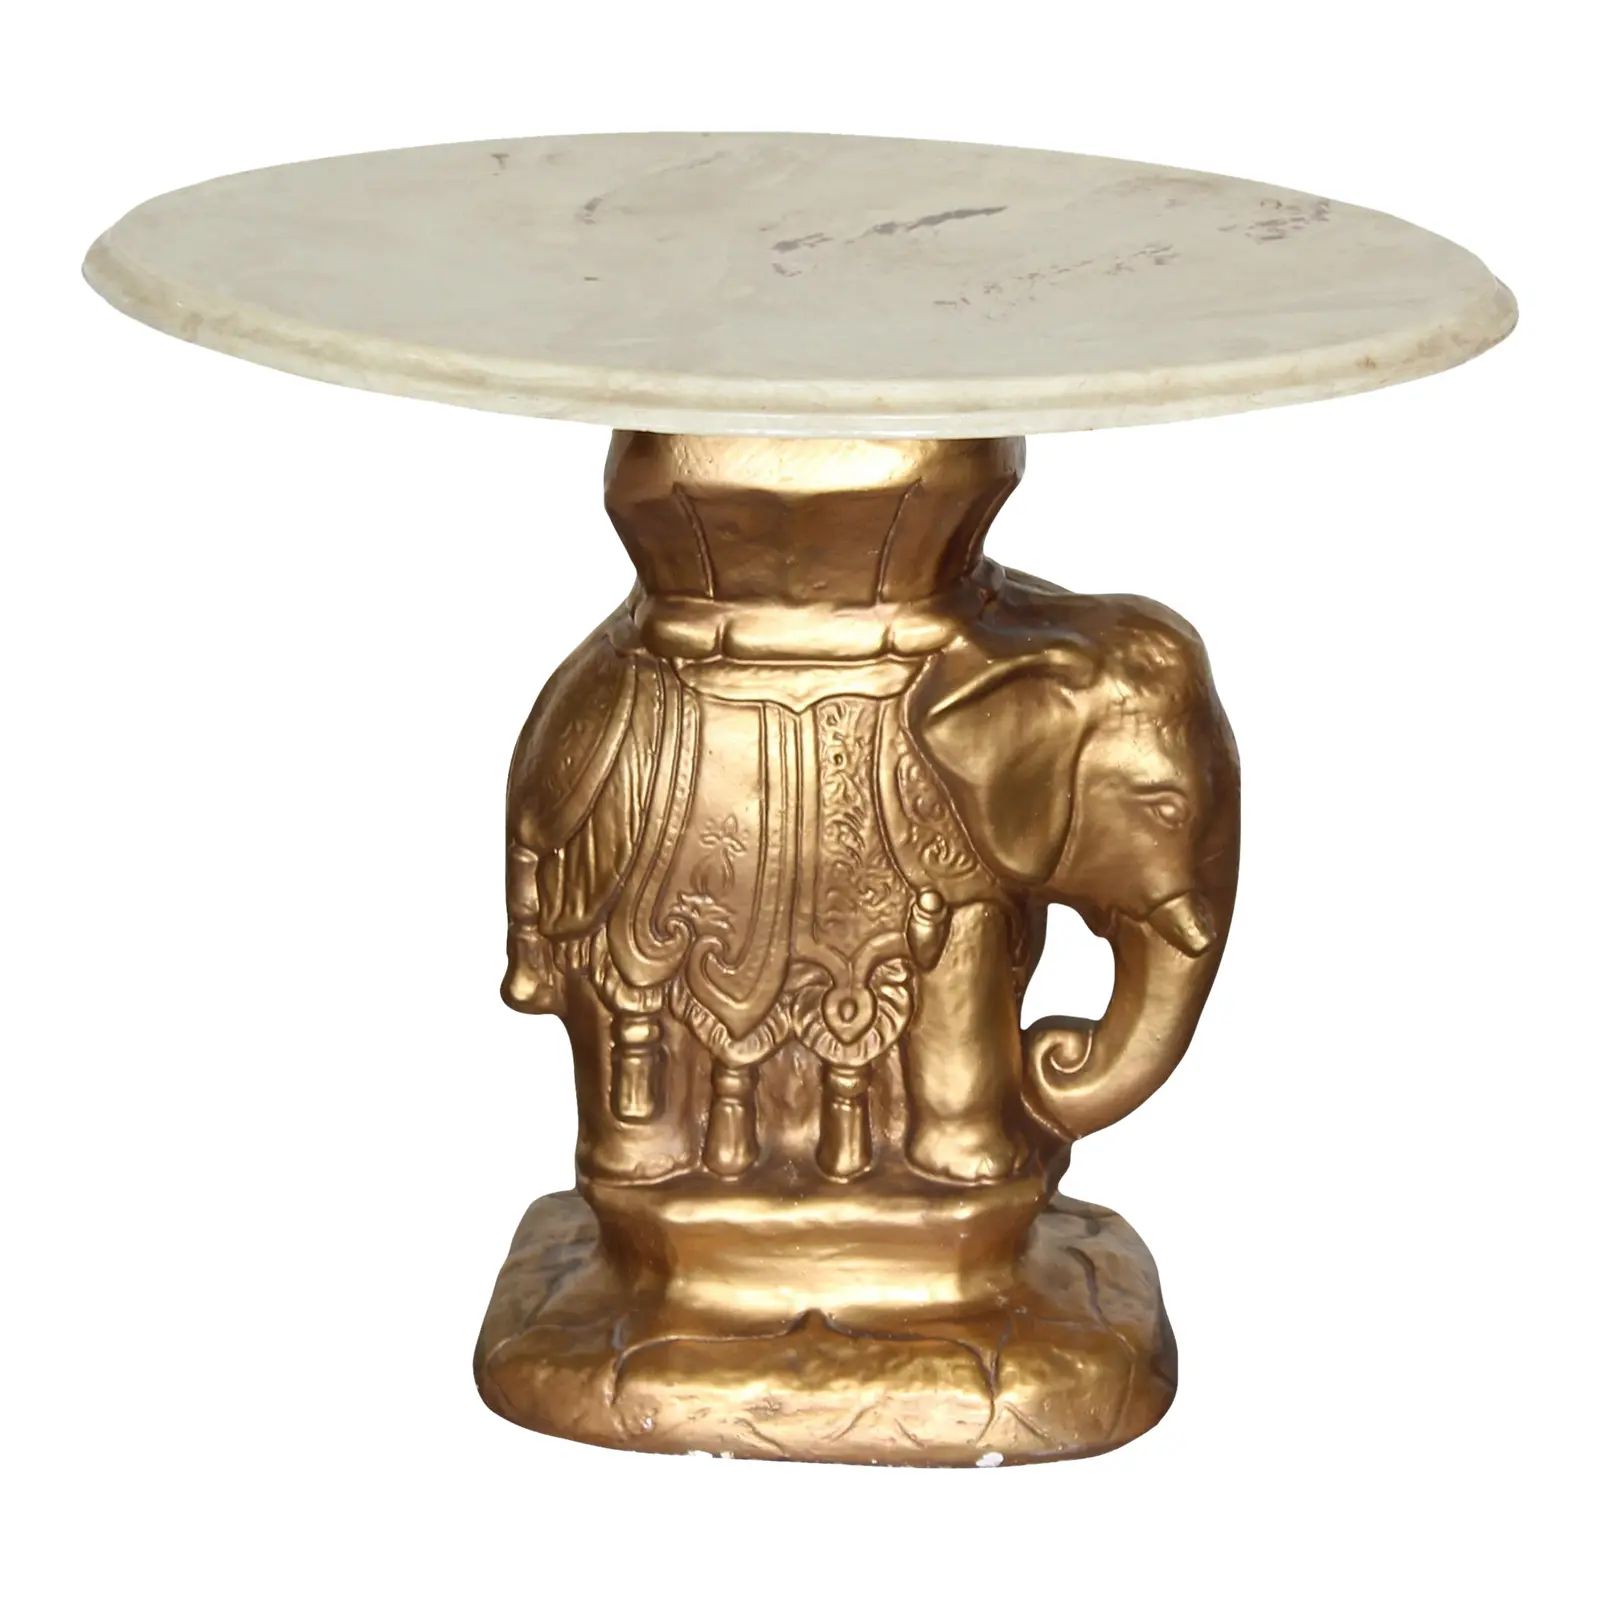 1970s Vintage Marble Top Elephant Side Table | Chairish